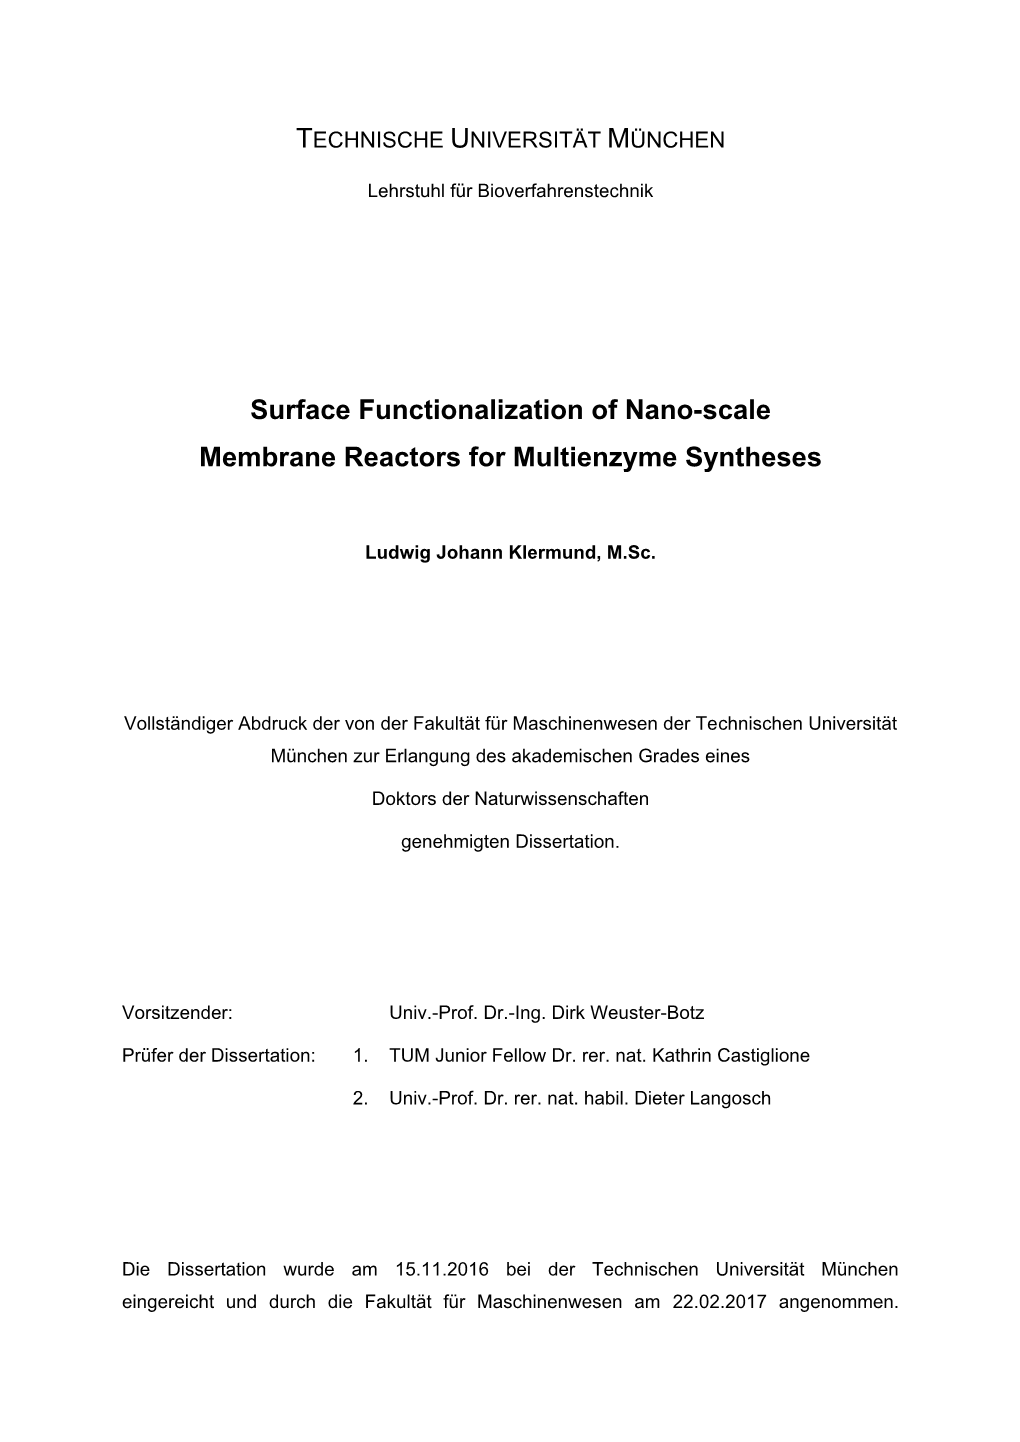 Surface Functionalization of Nano-Scale Membrane Reactors for Multienzyme Syntheses